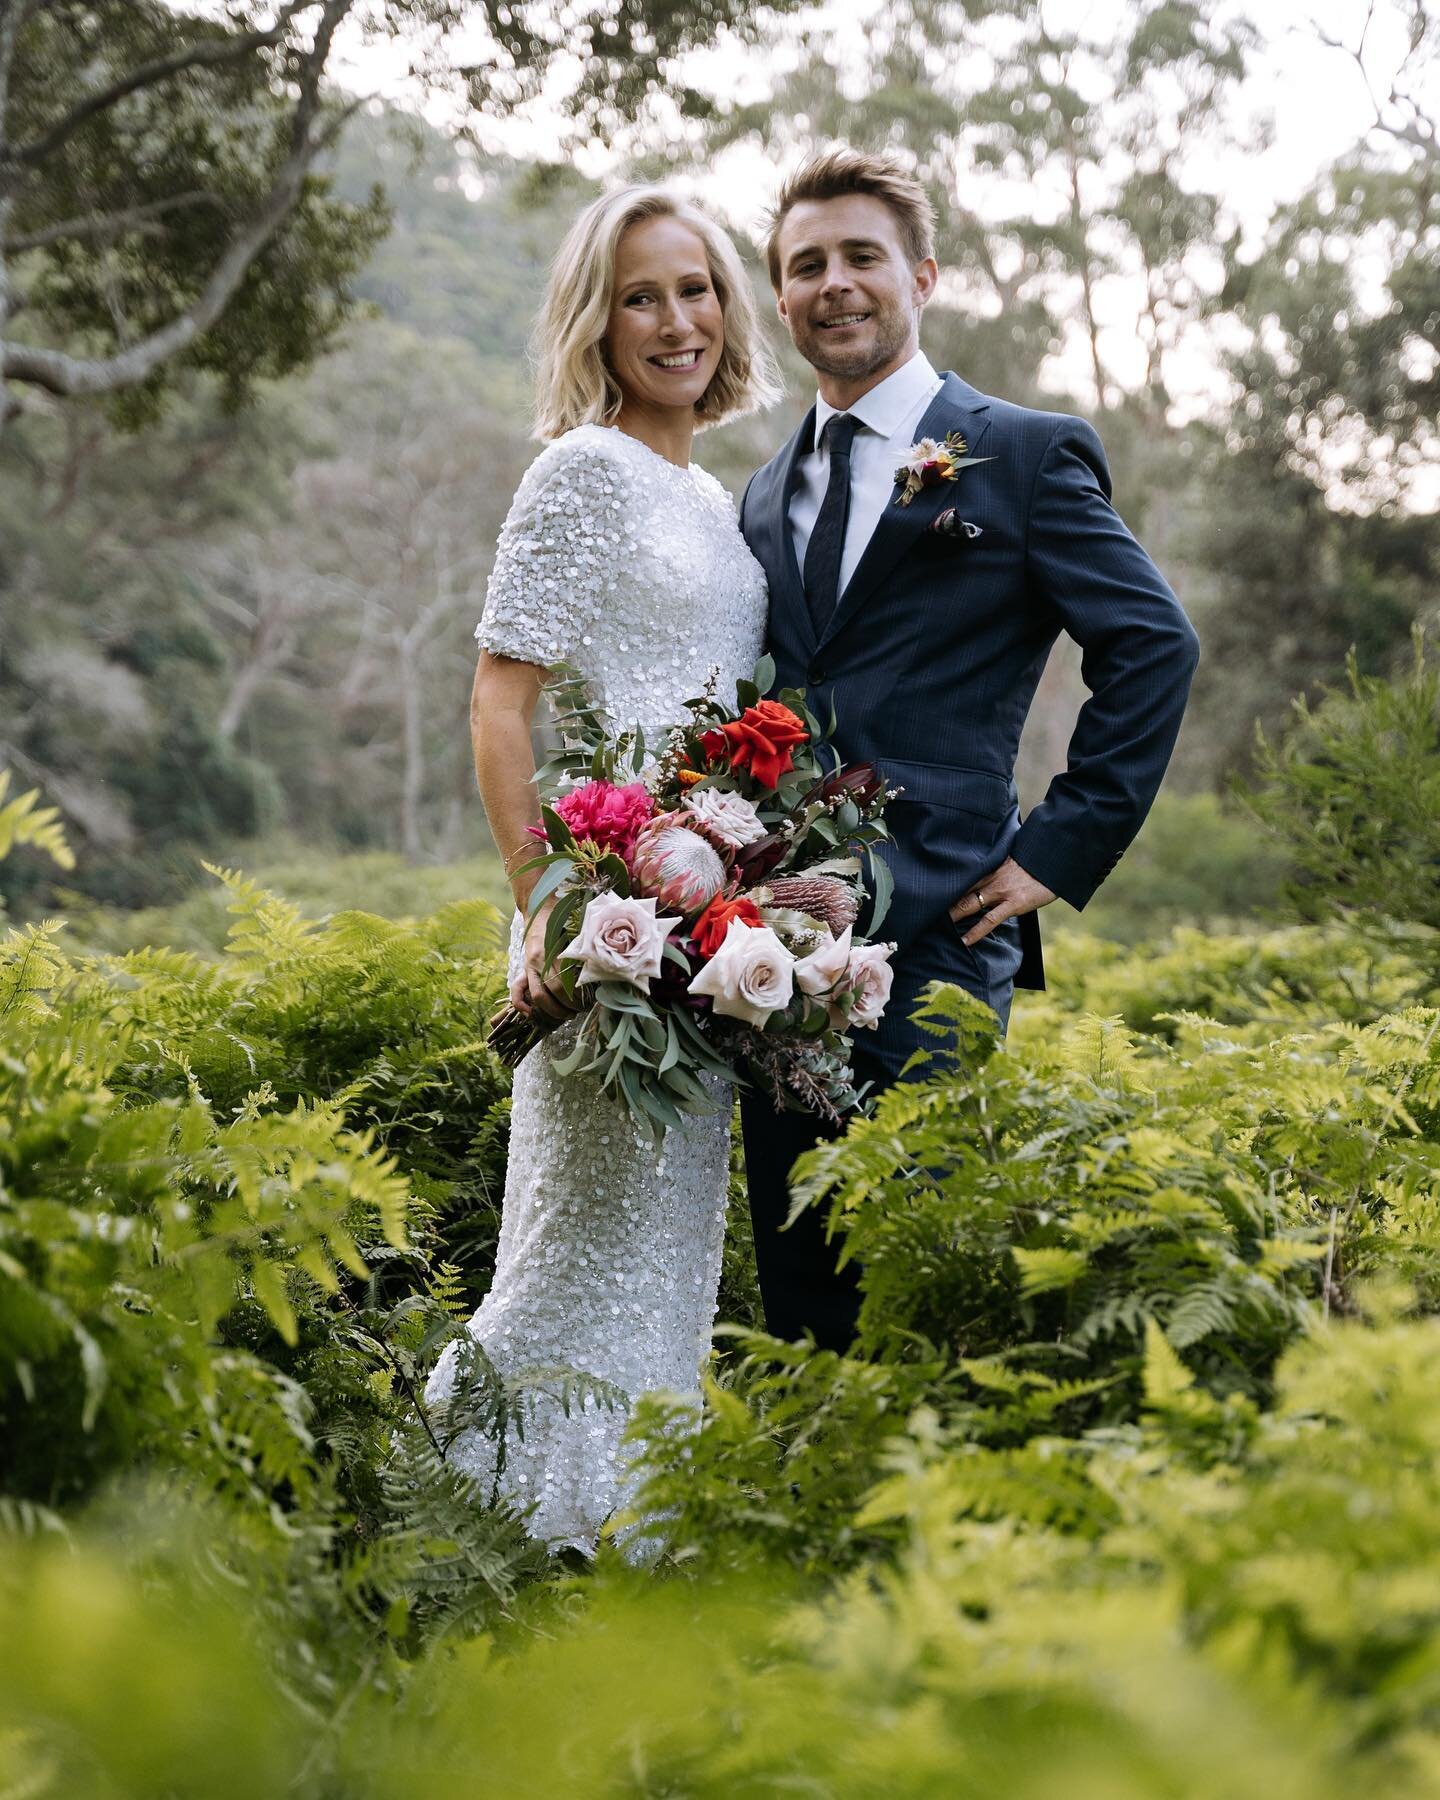 Zsofi + Alistair 

The Royal National Park truely is an amazing location for your wedding - so many fabulous photo opportunities! 

The colours in Zsofi&rsquo;s bouquet  just &lsquo;pop&rsquo; amongst the green undergrowth